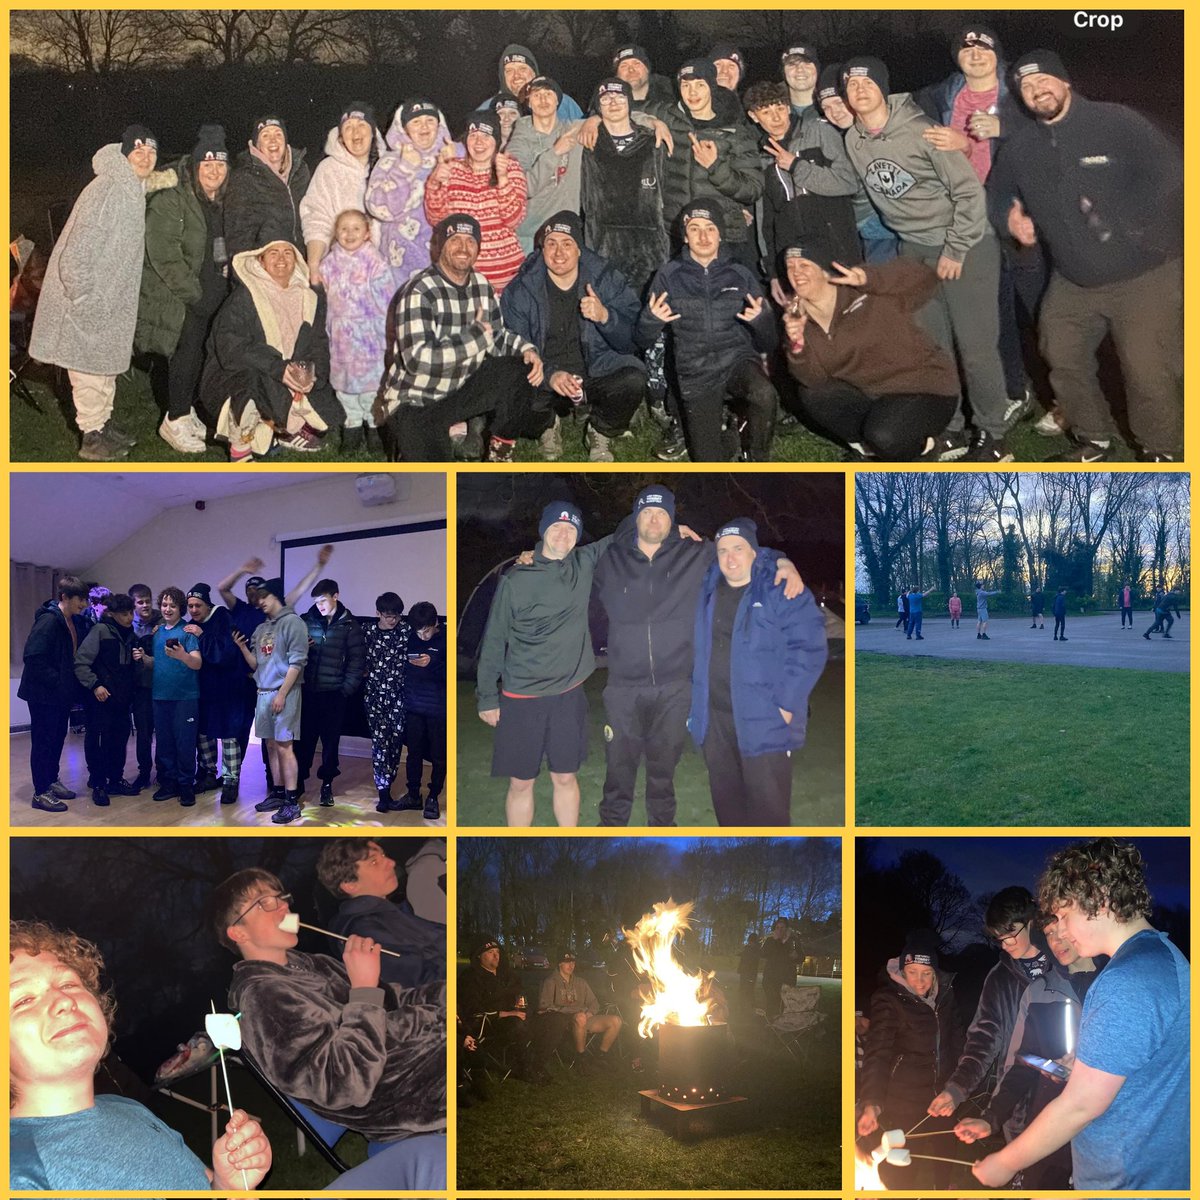 Fantastic night for our u15 Rangers who camped out under the stars with parents for a worthy cause, the great Tommy sleep out. Raising a ton of money for charity in the process. Proud of each and everyone involved. #widnesfc #thegreattommysleepout #rangersfamily